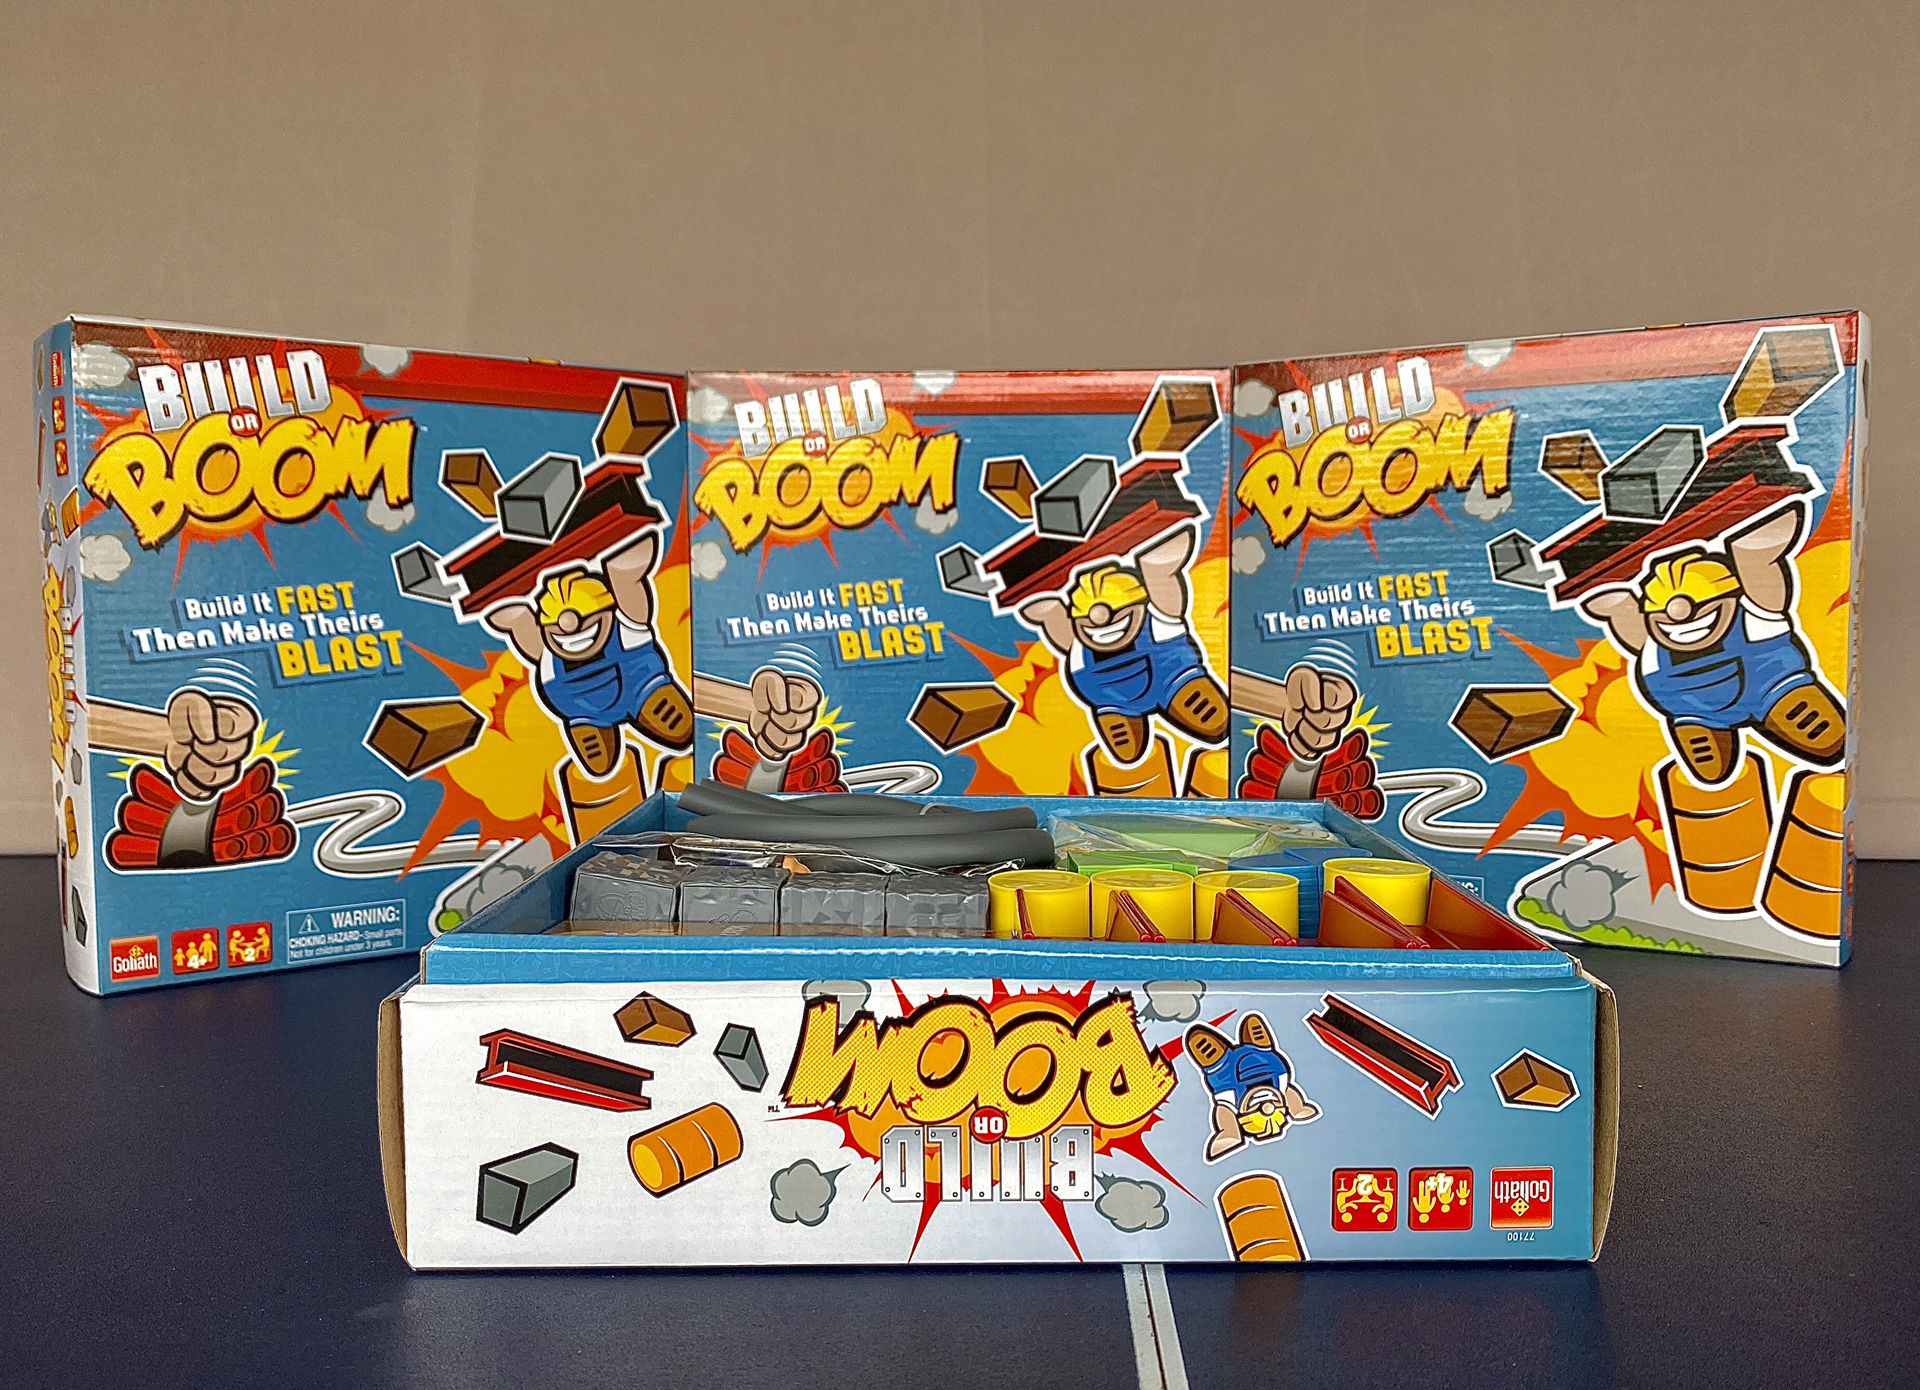 BRAND NEW Goliath Build or Boom Game - Family Fun Building Game